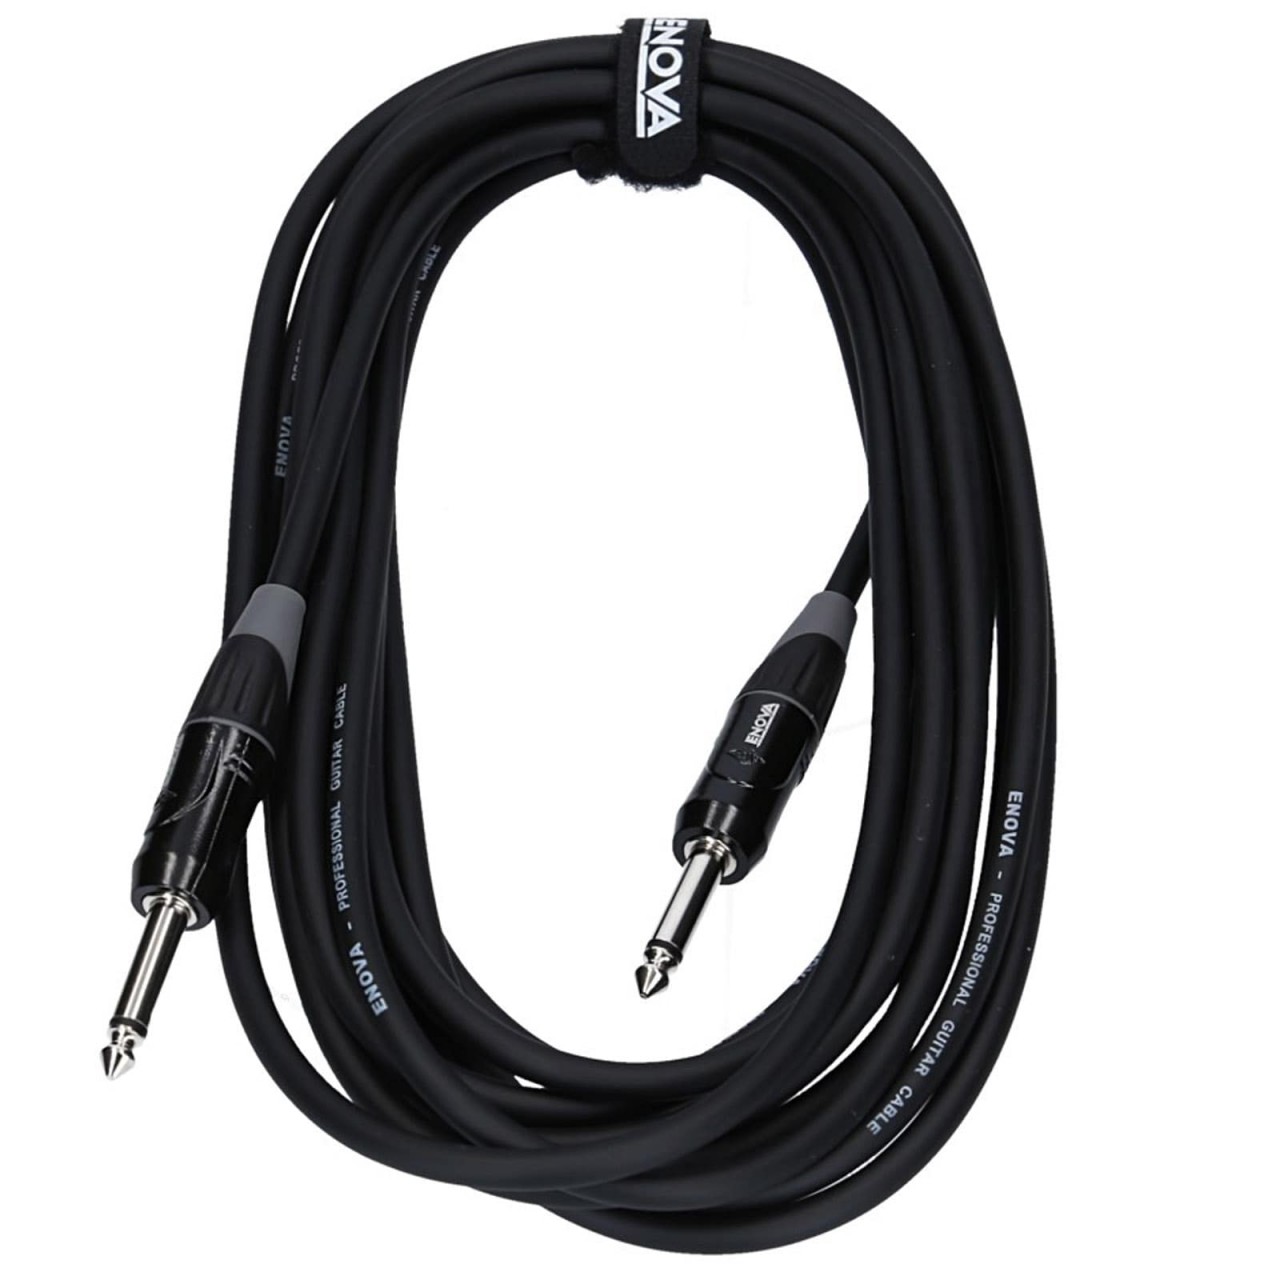 10m instrument cable with 6.3mm jack connectors 2 pin on both ends